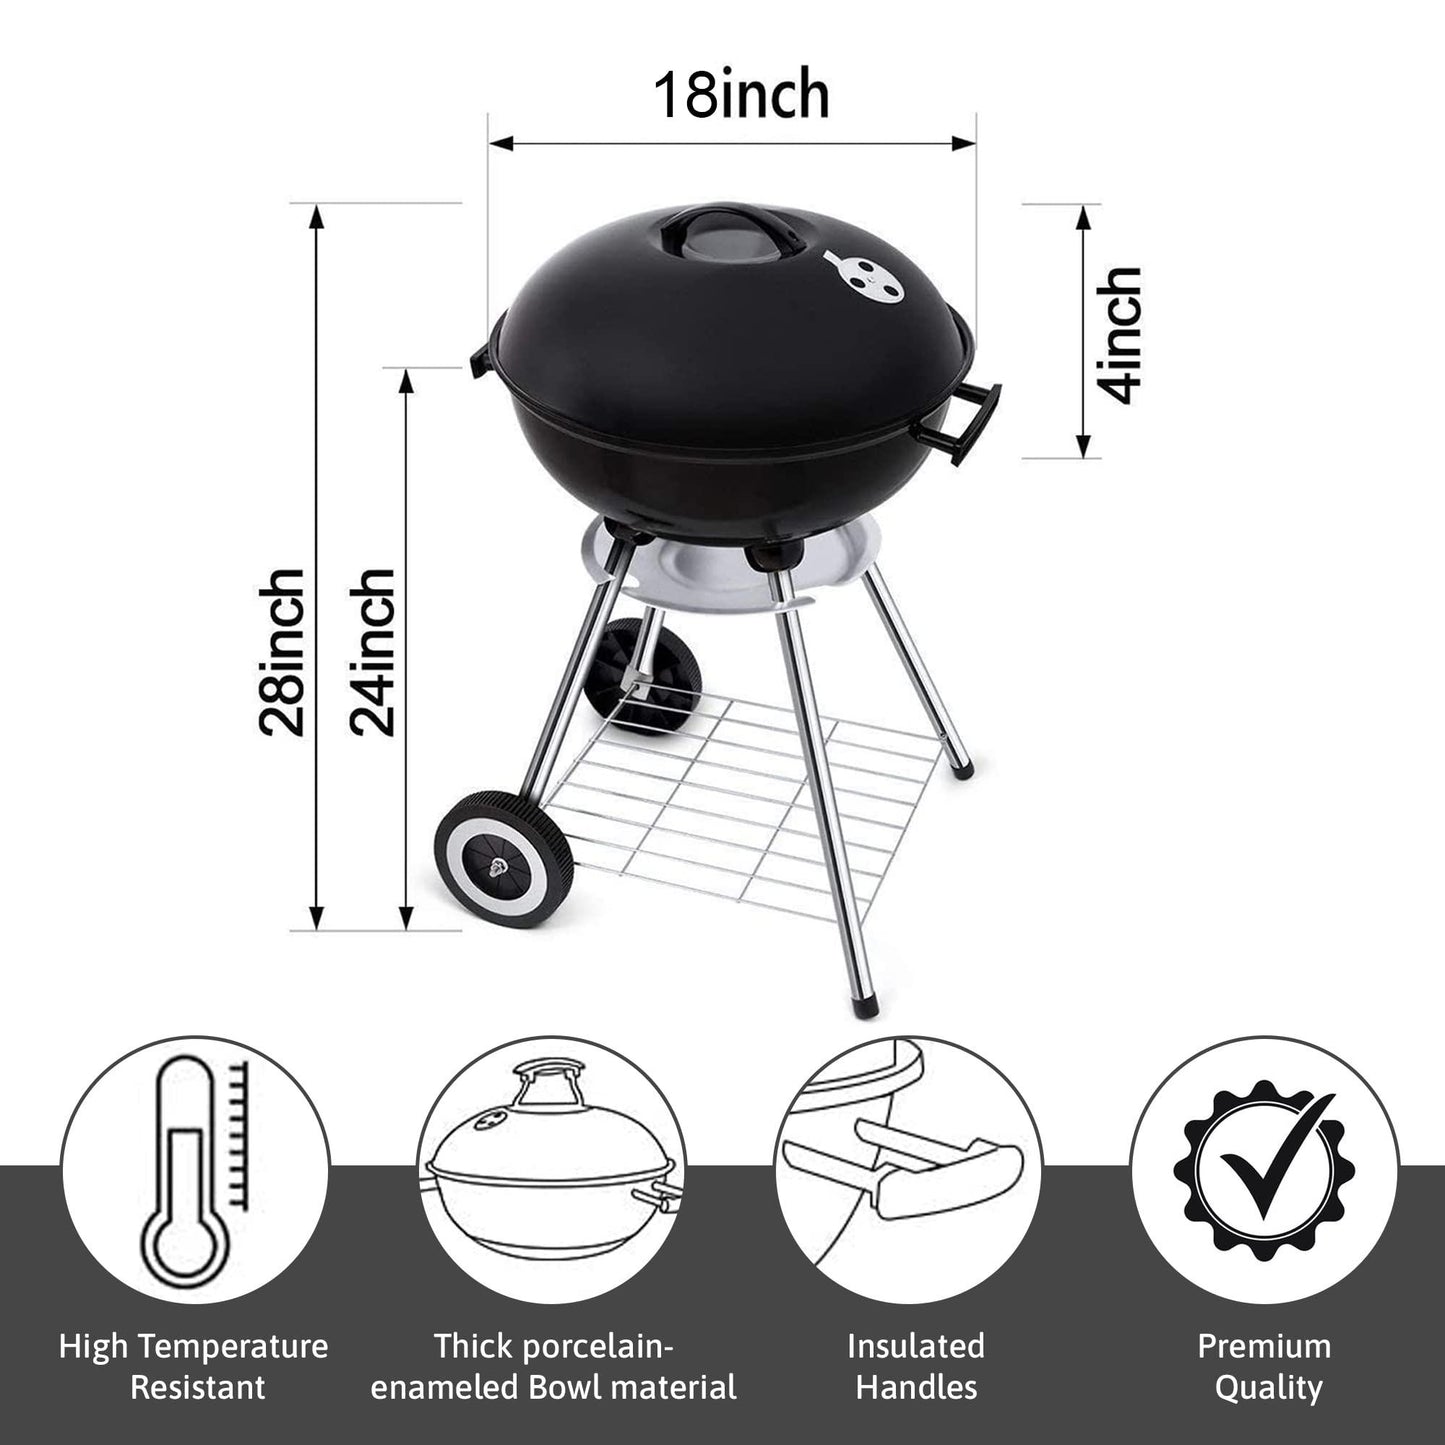 18 Inch Portable Charcoal Grill with Wheels for Outdoor Cooking Barbecue Camping BBQ Coal Kettle Grill - Heavy Duty Round with Thickened Grilling Bowl Wheels for Small Patio Backyard - CookCave